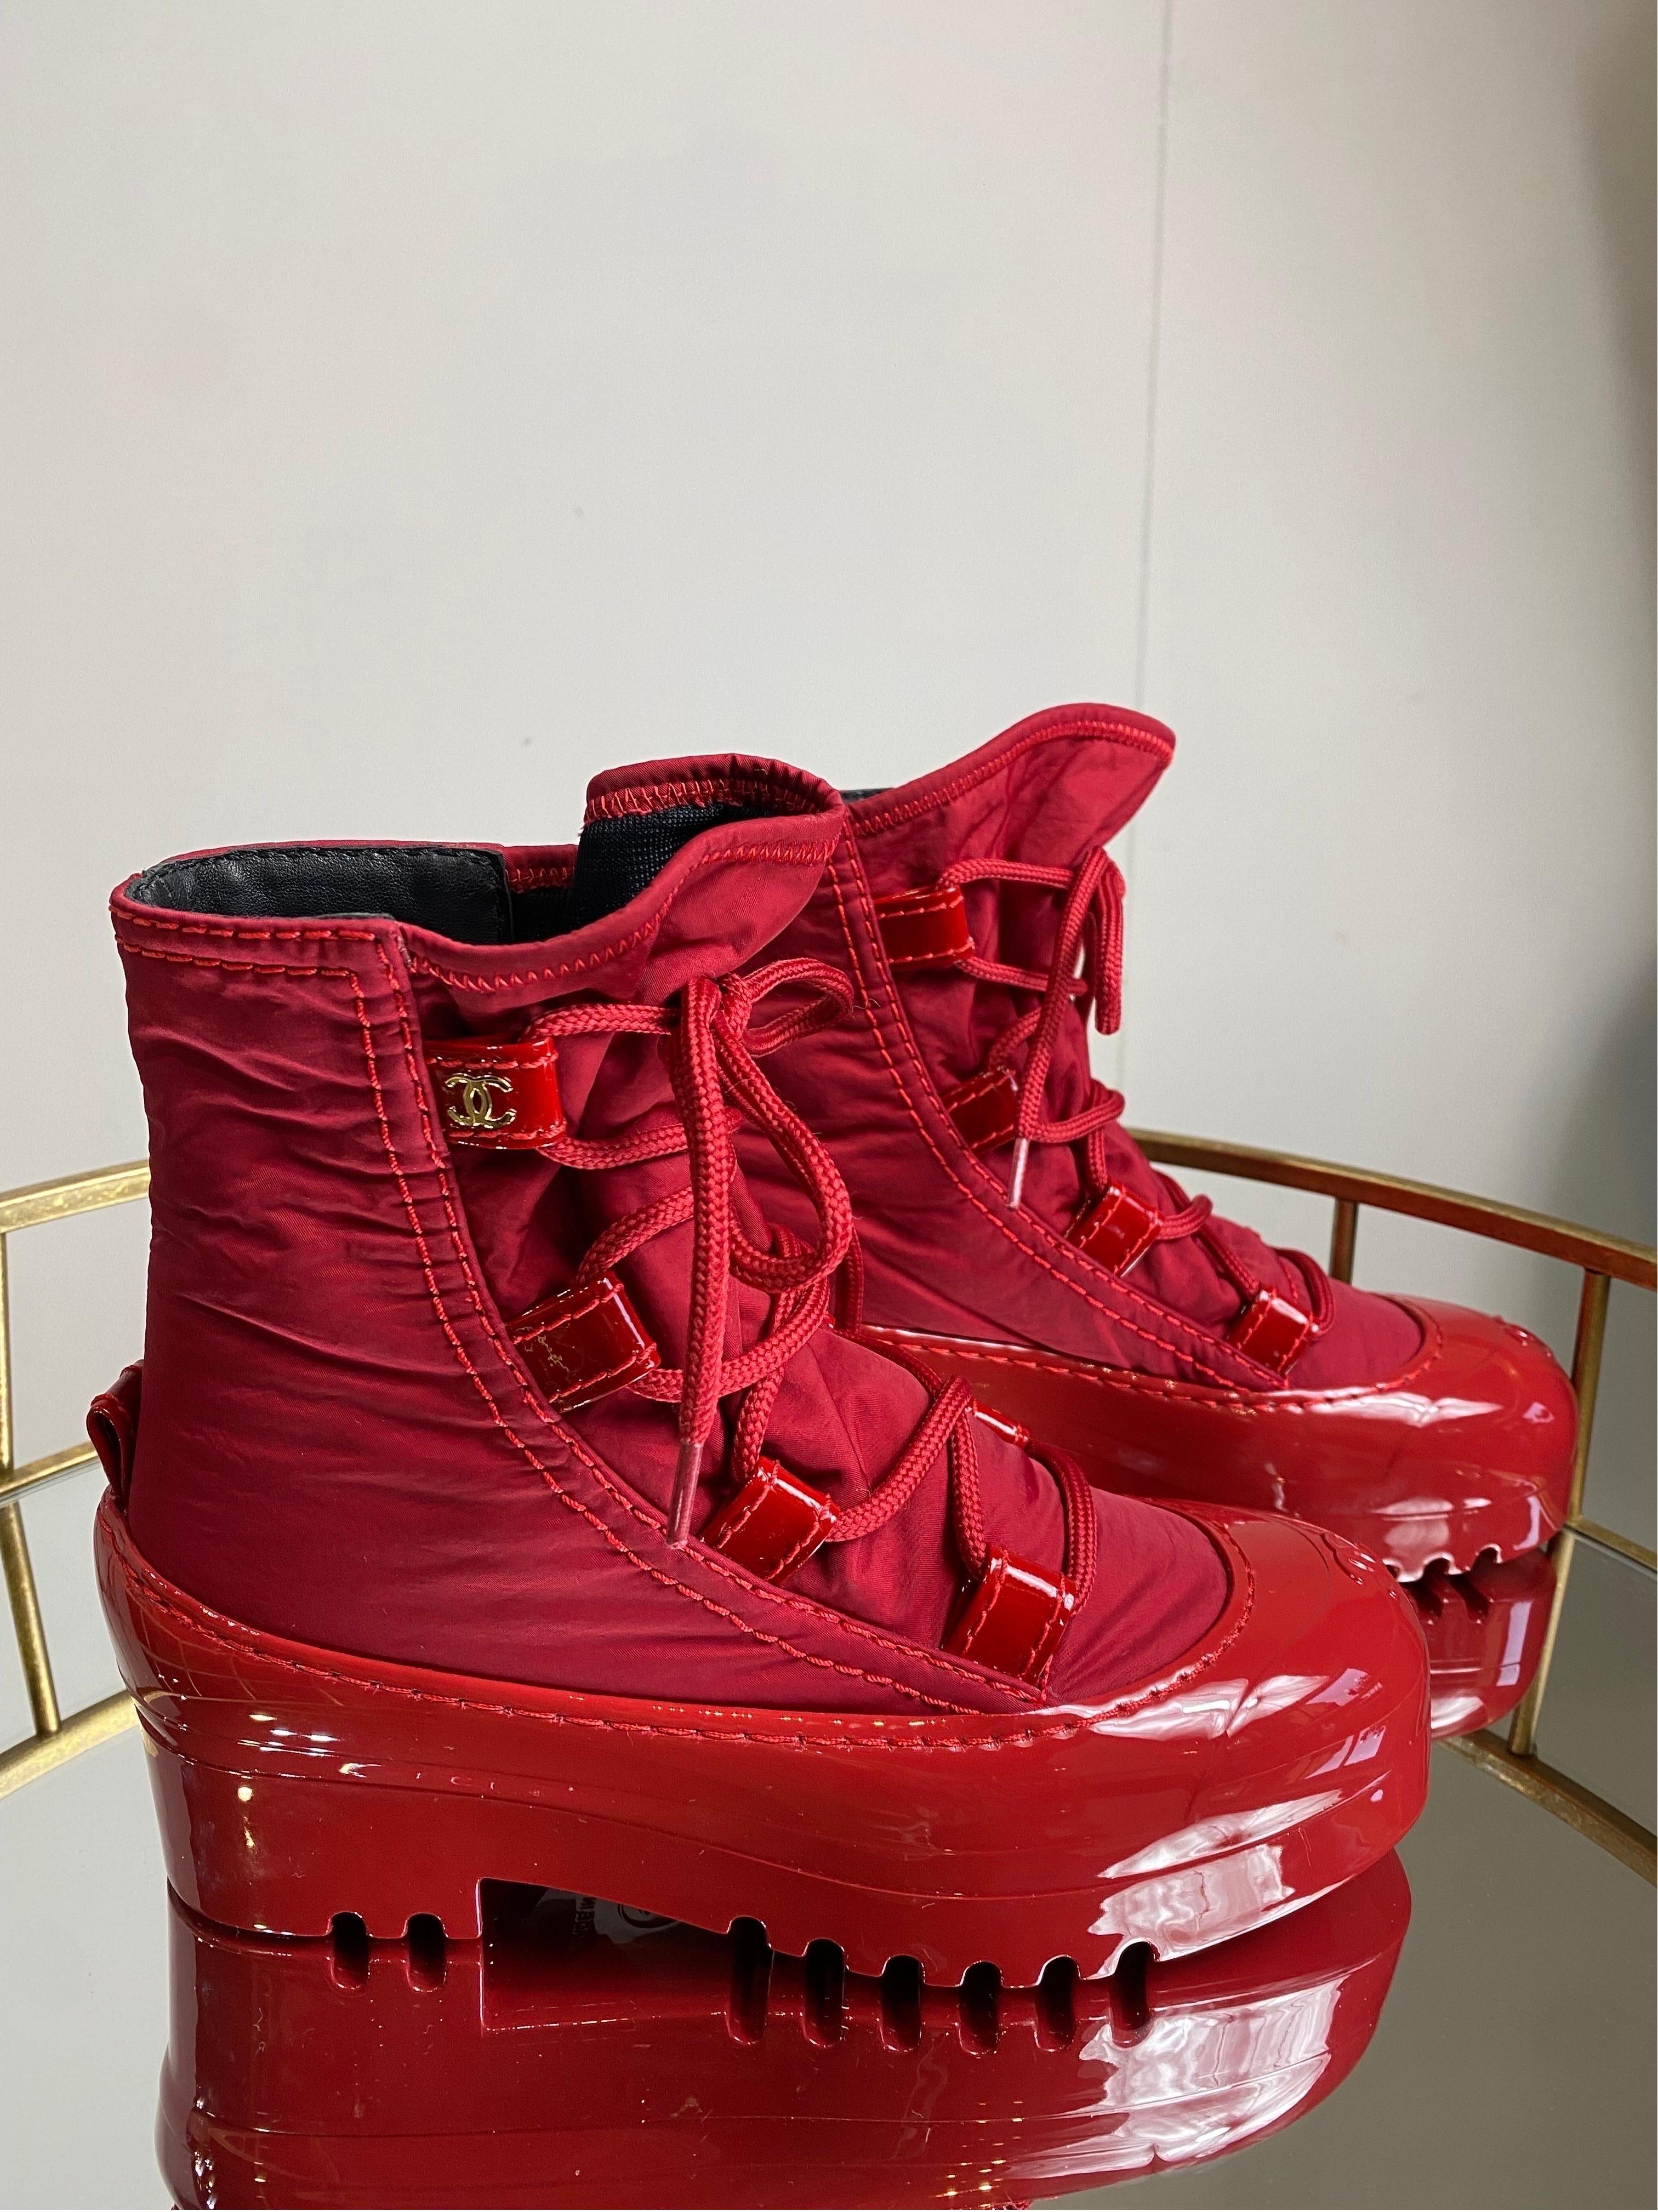 Chanel sportive ankle boots.
In nylon and red patent leather details.
Number 35
Heel 3.5 cm
Plateau 1.5 cm
New, never used but have a small halo on the back of the right shoe as shown in the photo.
They have original box.